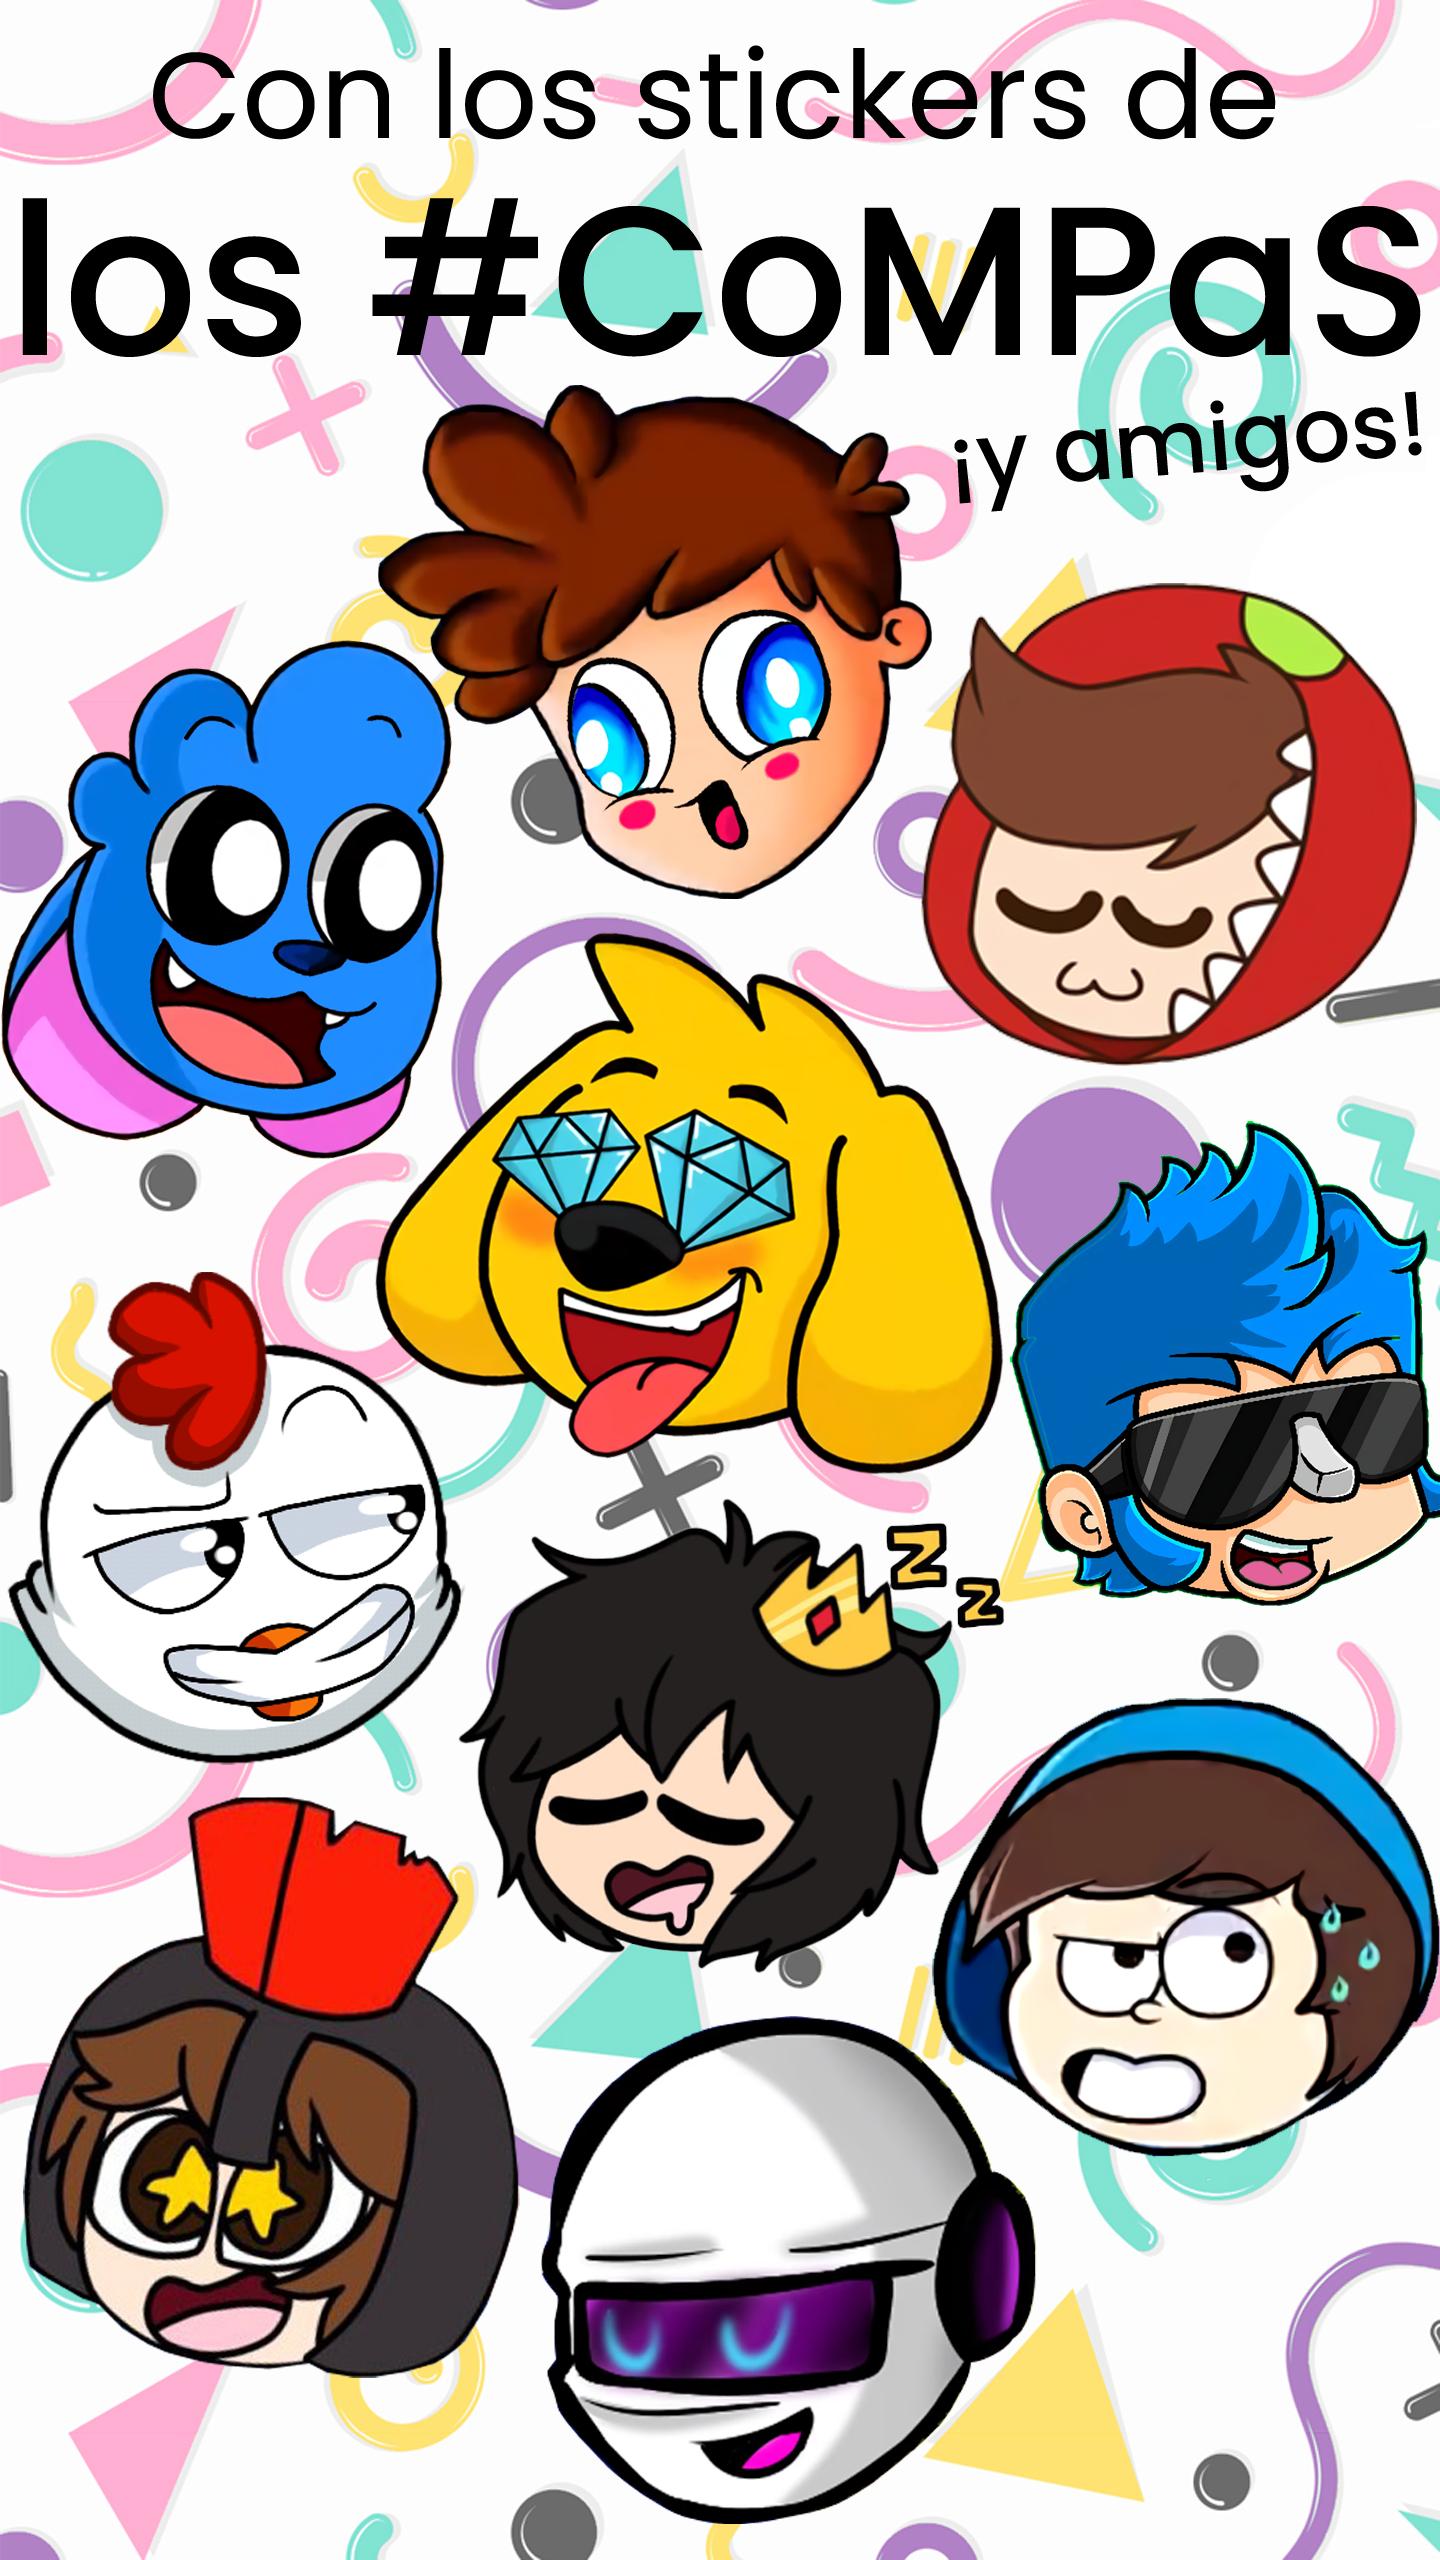 Stickerstube Stickers De Youtubers For Android Apk Download - emojis stickers de rodny roblox